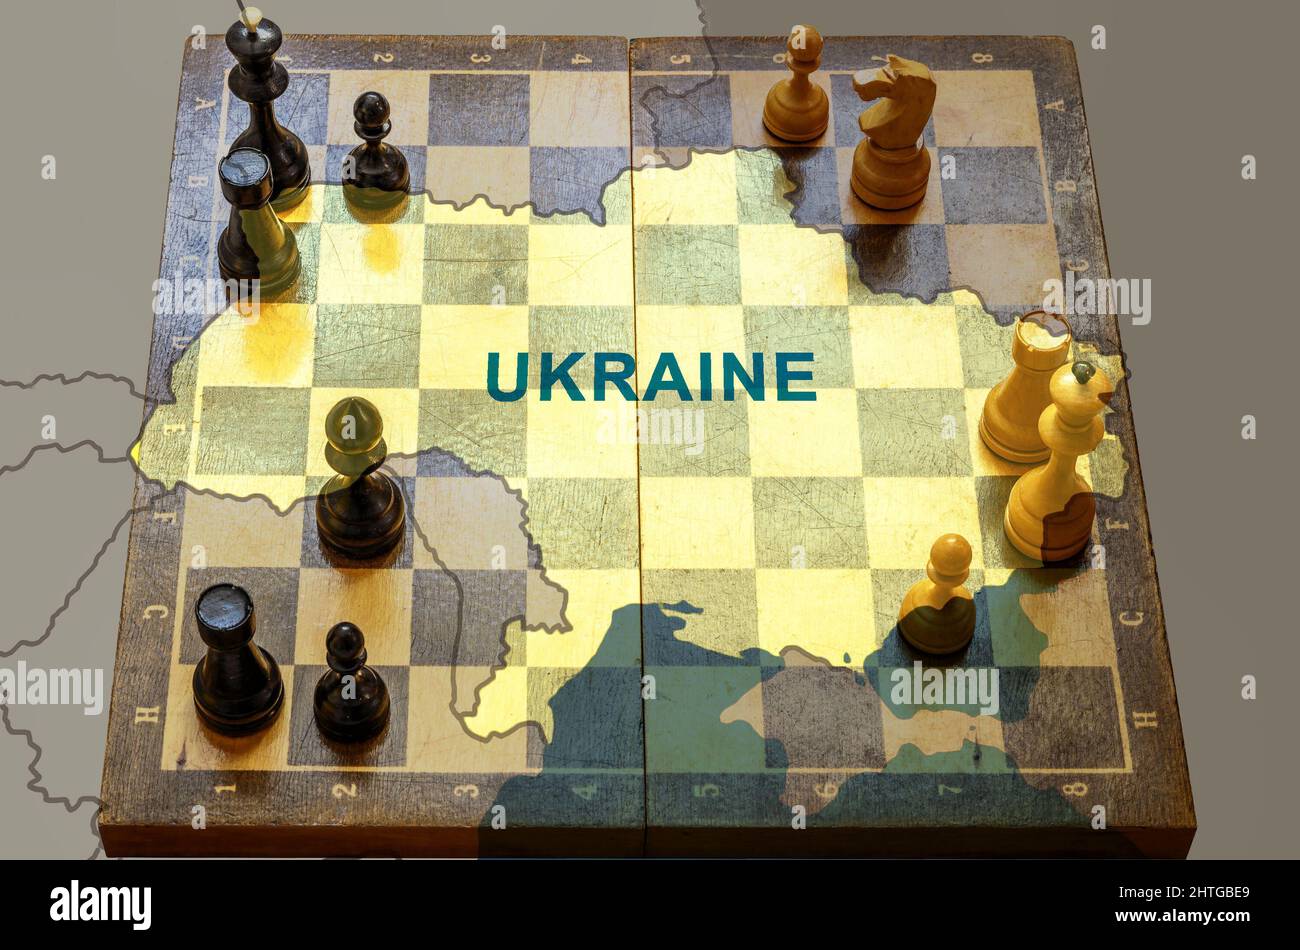 War in Ukraine, chess like geopolitics game between Russia, EU and USA. Ukraine map on chessboard. Concept of political tension, war, crisis, conflict Stock Photo